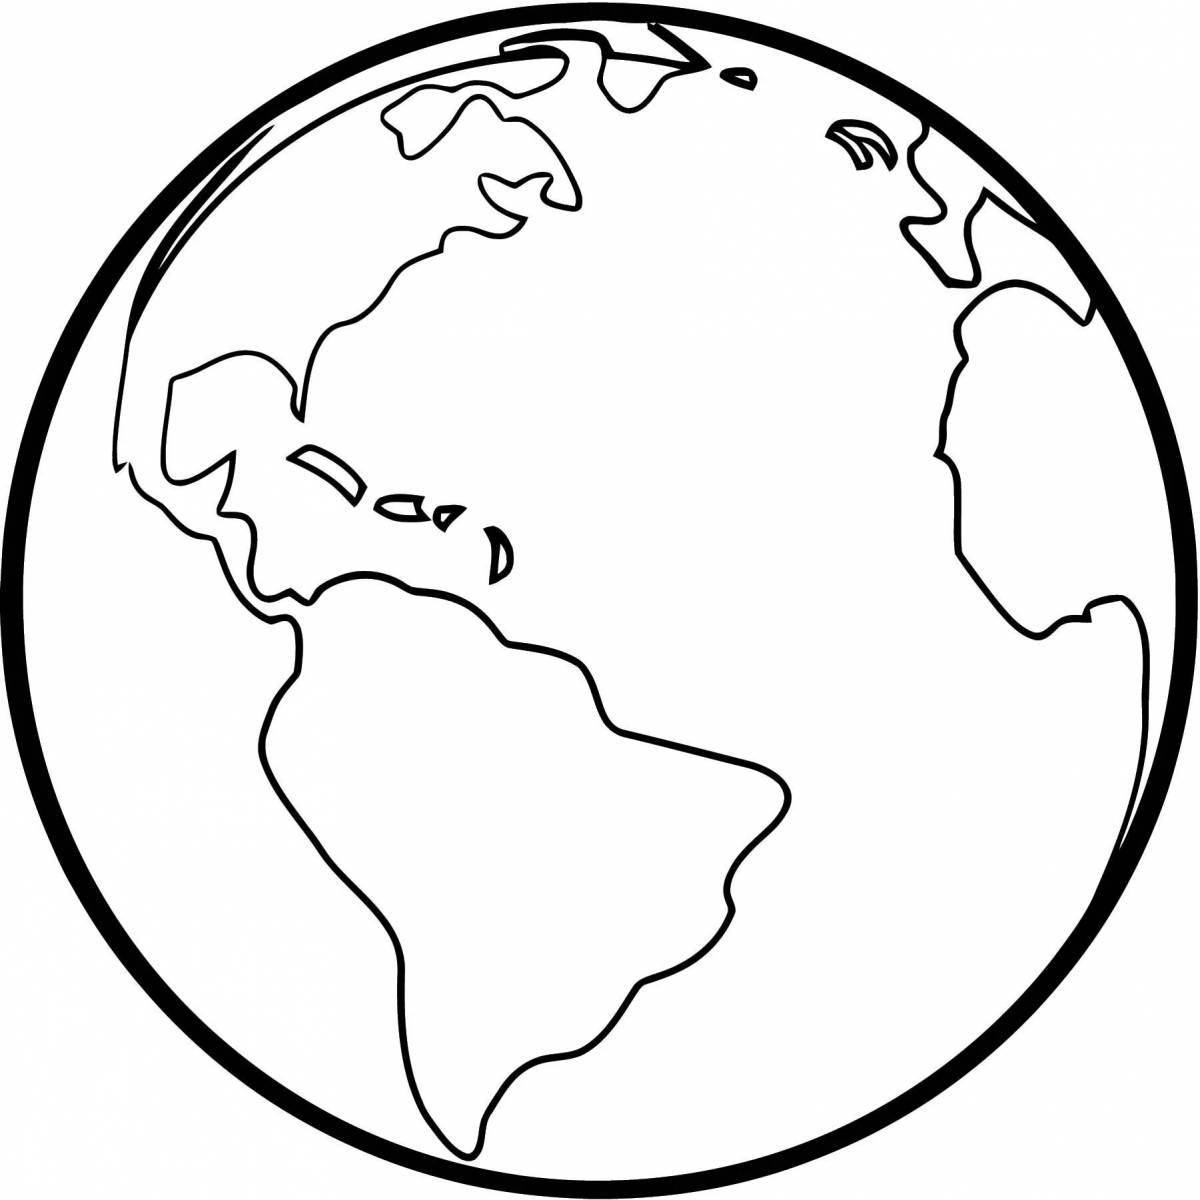 Creative globe coloring page template for kids